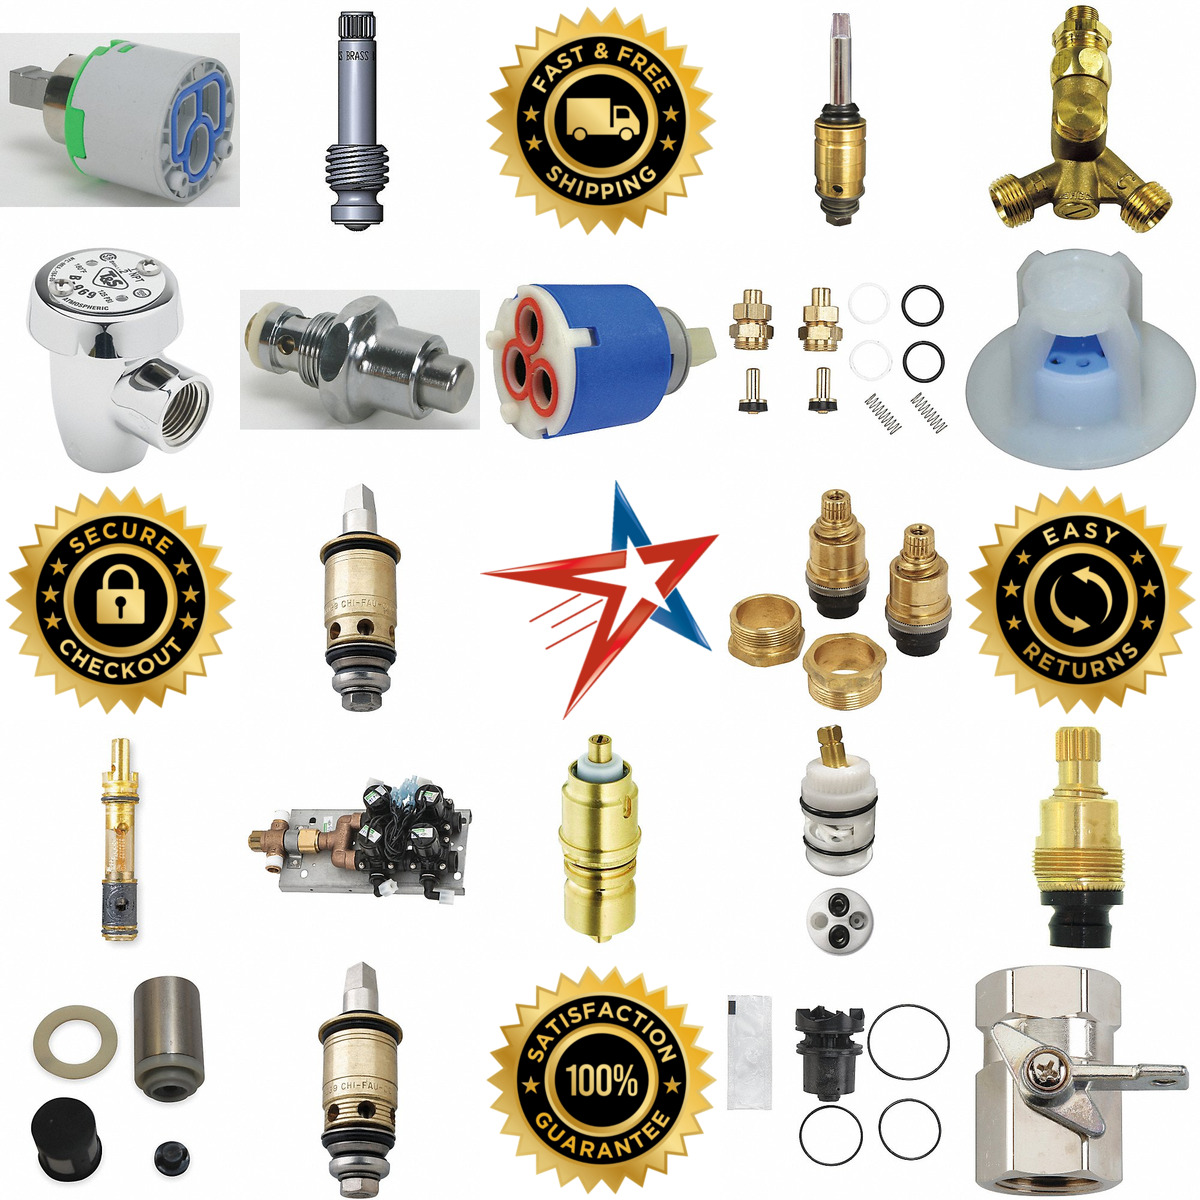 A selection of Faucet Cartridges Stems Valves and Valve Parts products on GoVets